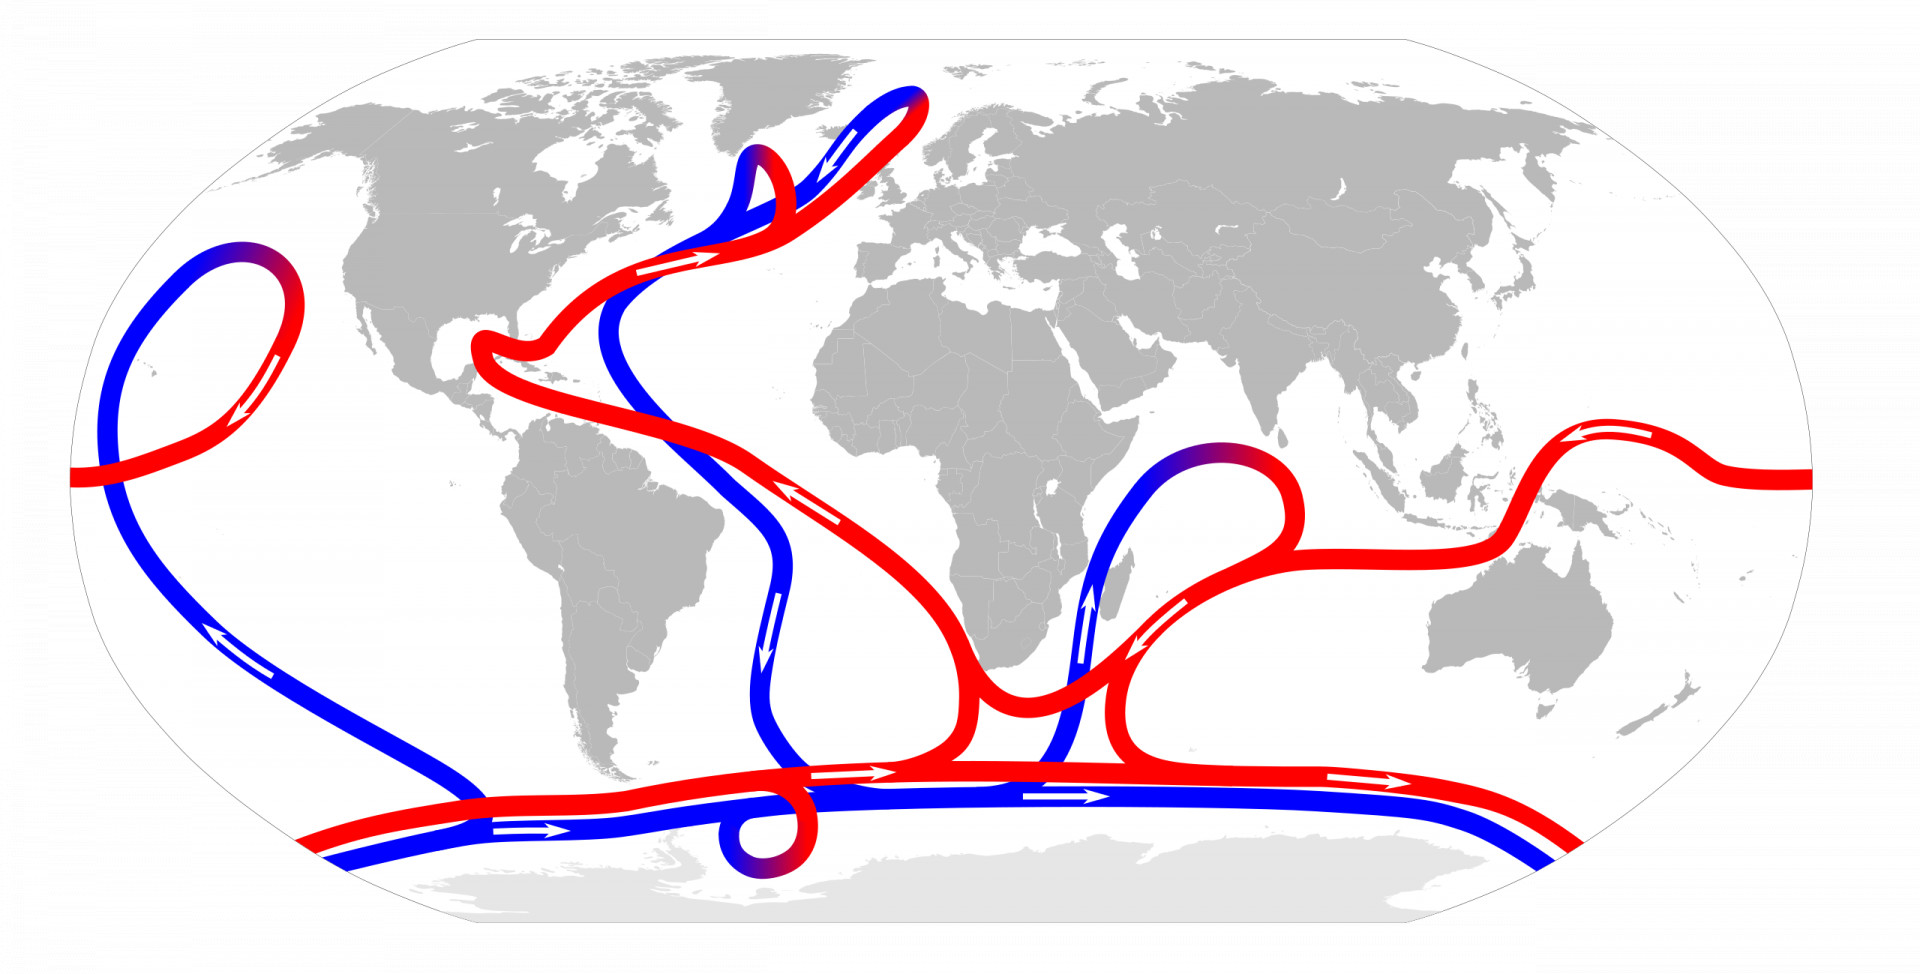 Red (warm surface) and blue (cold deep-ocean) lines on a white-grey world map indicate the path of the global ocean conveyor belt around the globe